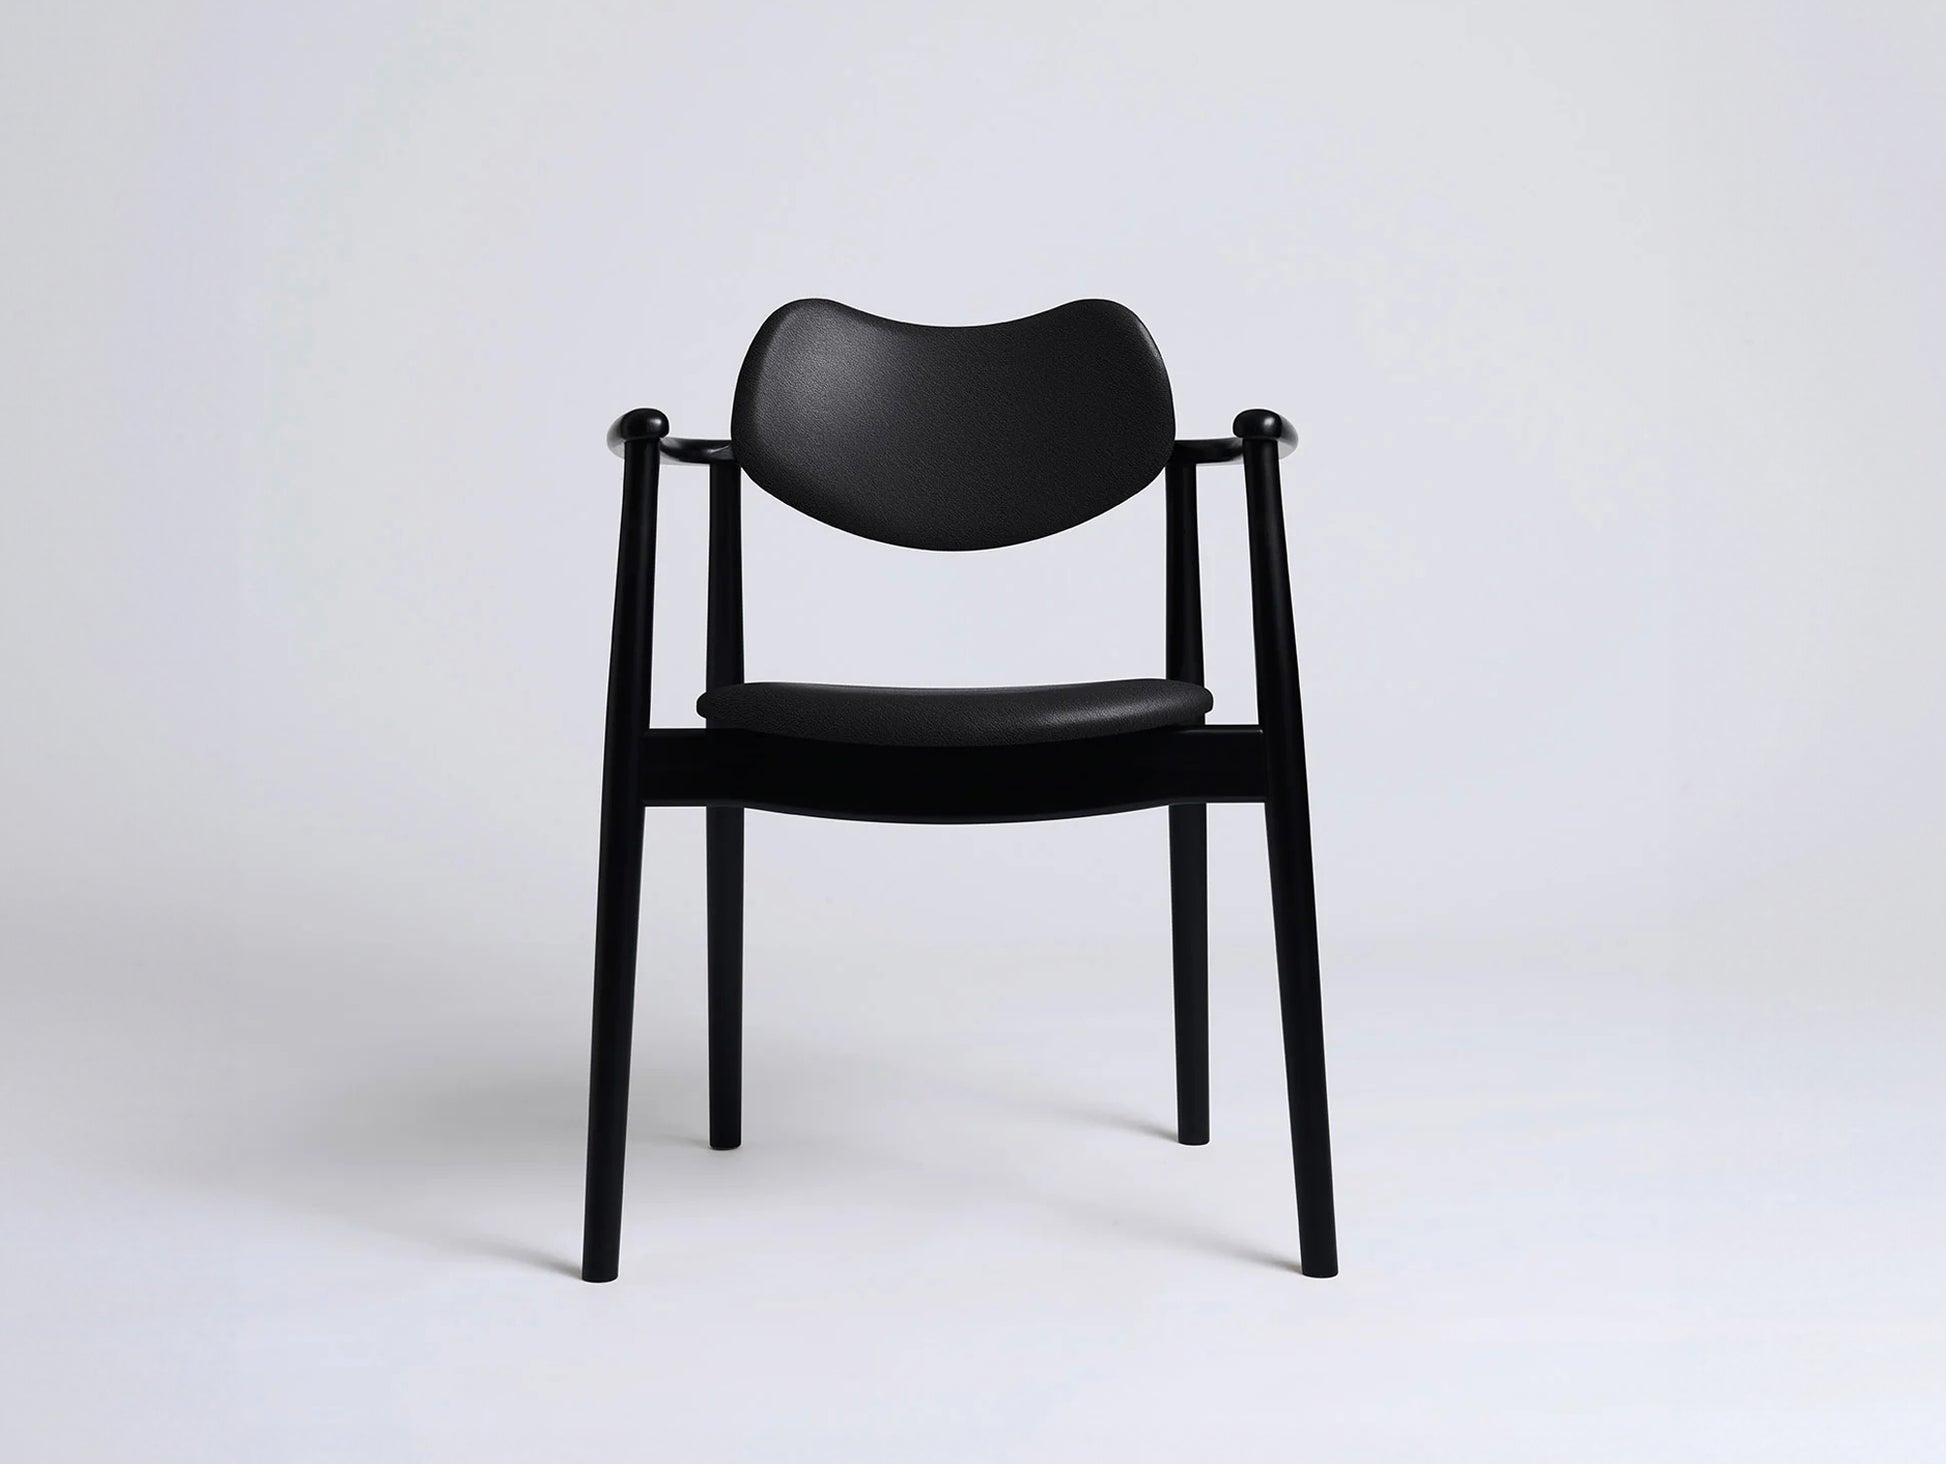 Regatta Chair Seat and Back Upholstered by Ro Collection - Black Lacquered Beech / Standard Sierra Black Leather